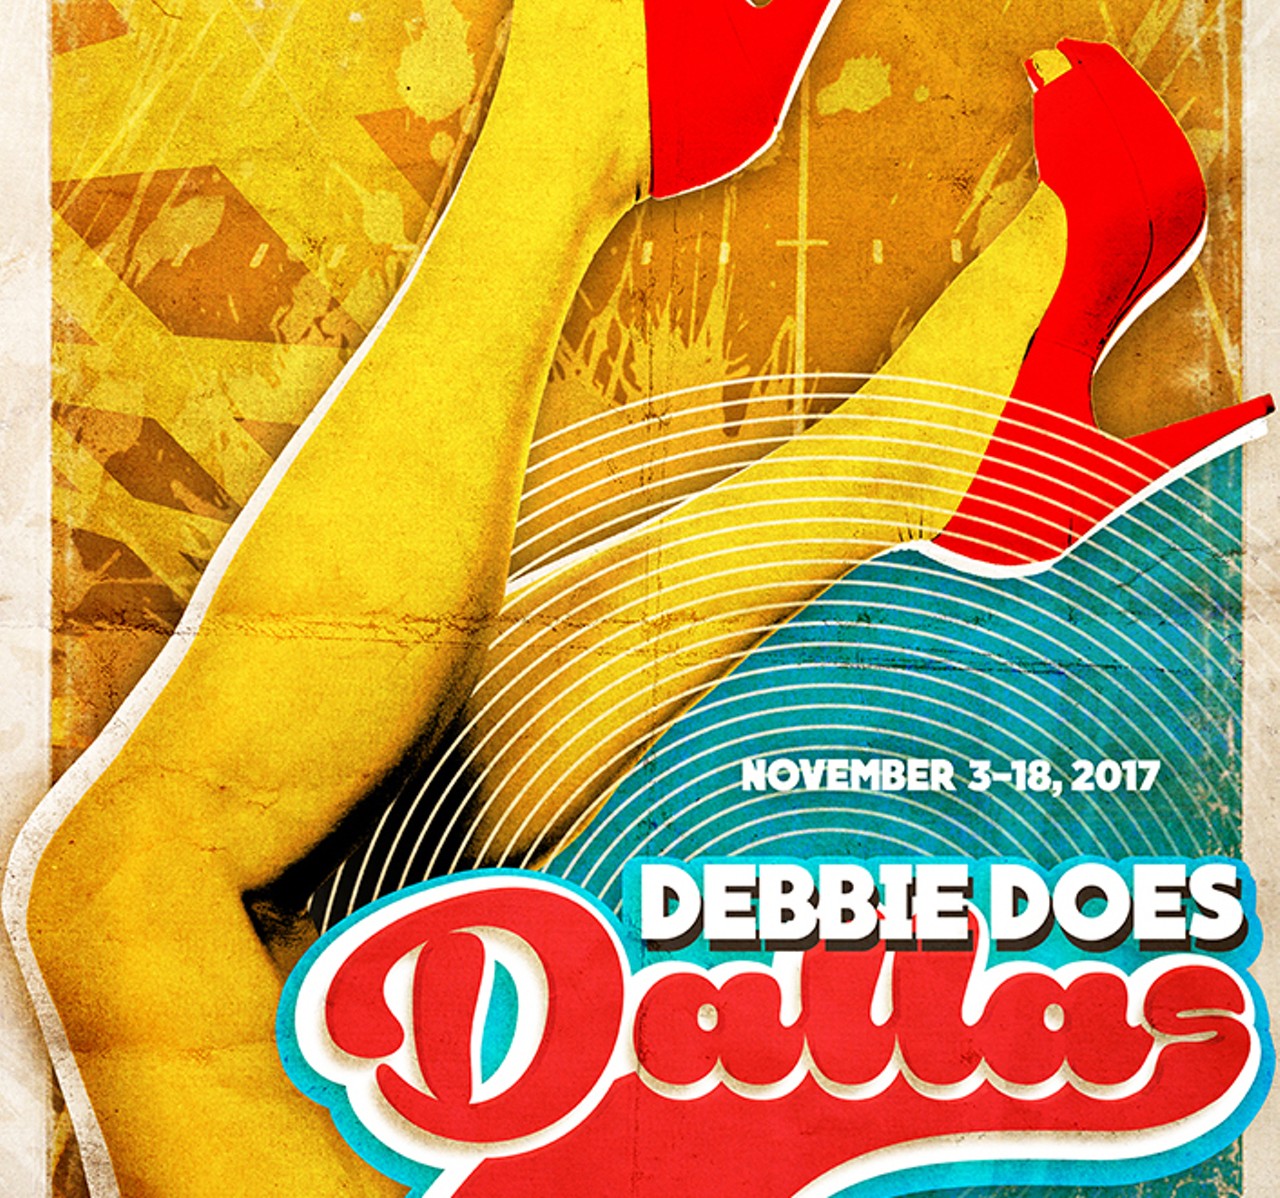 Opens Friday, Nov. 3Debbie Does Dallas at Parliament House